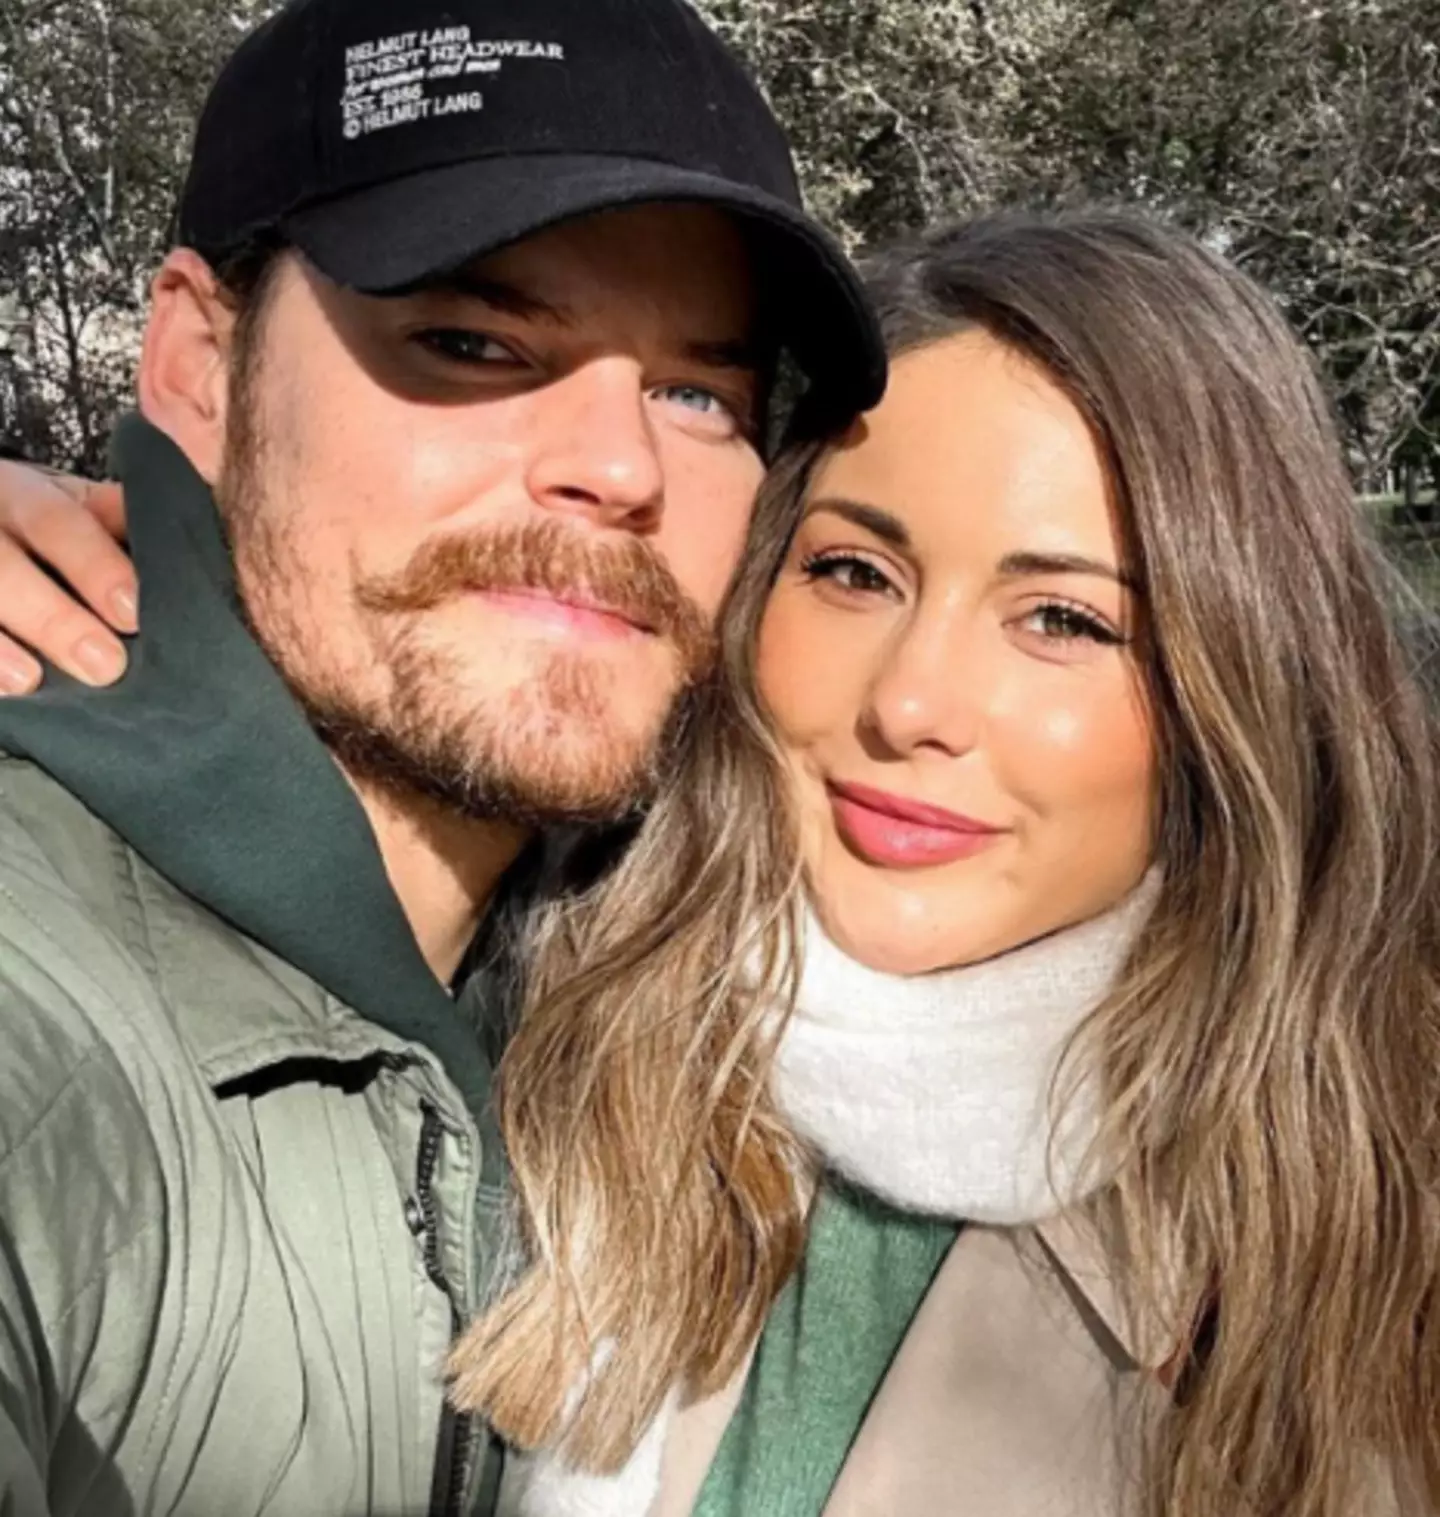 Louise Thompson's fiancé, Ryan Libbey, revealed his wife was in hospital for nearly two weeks.